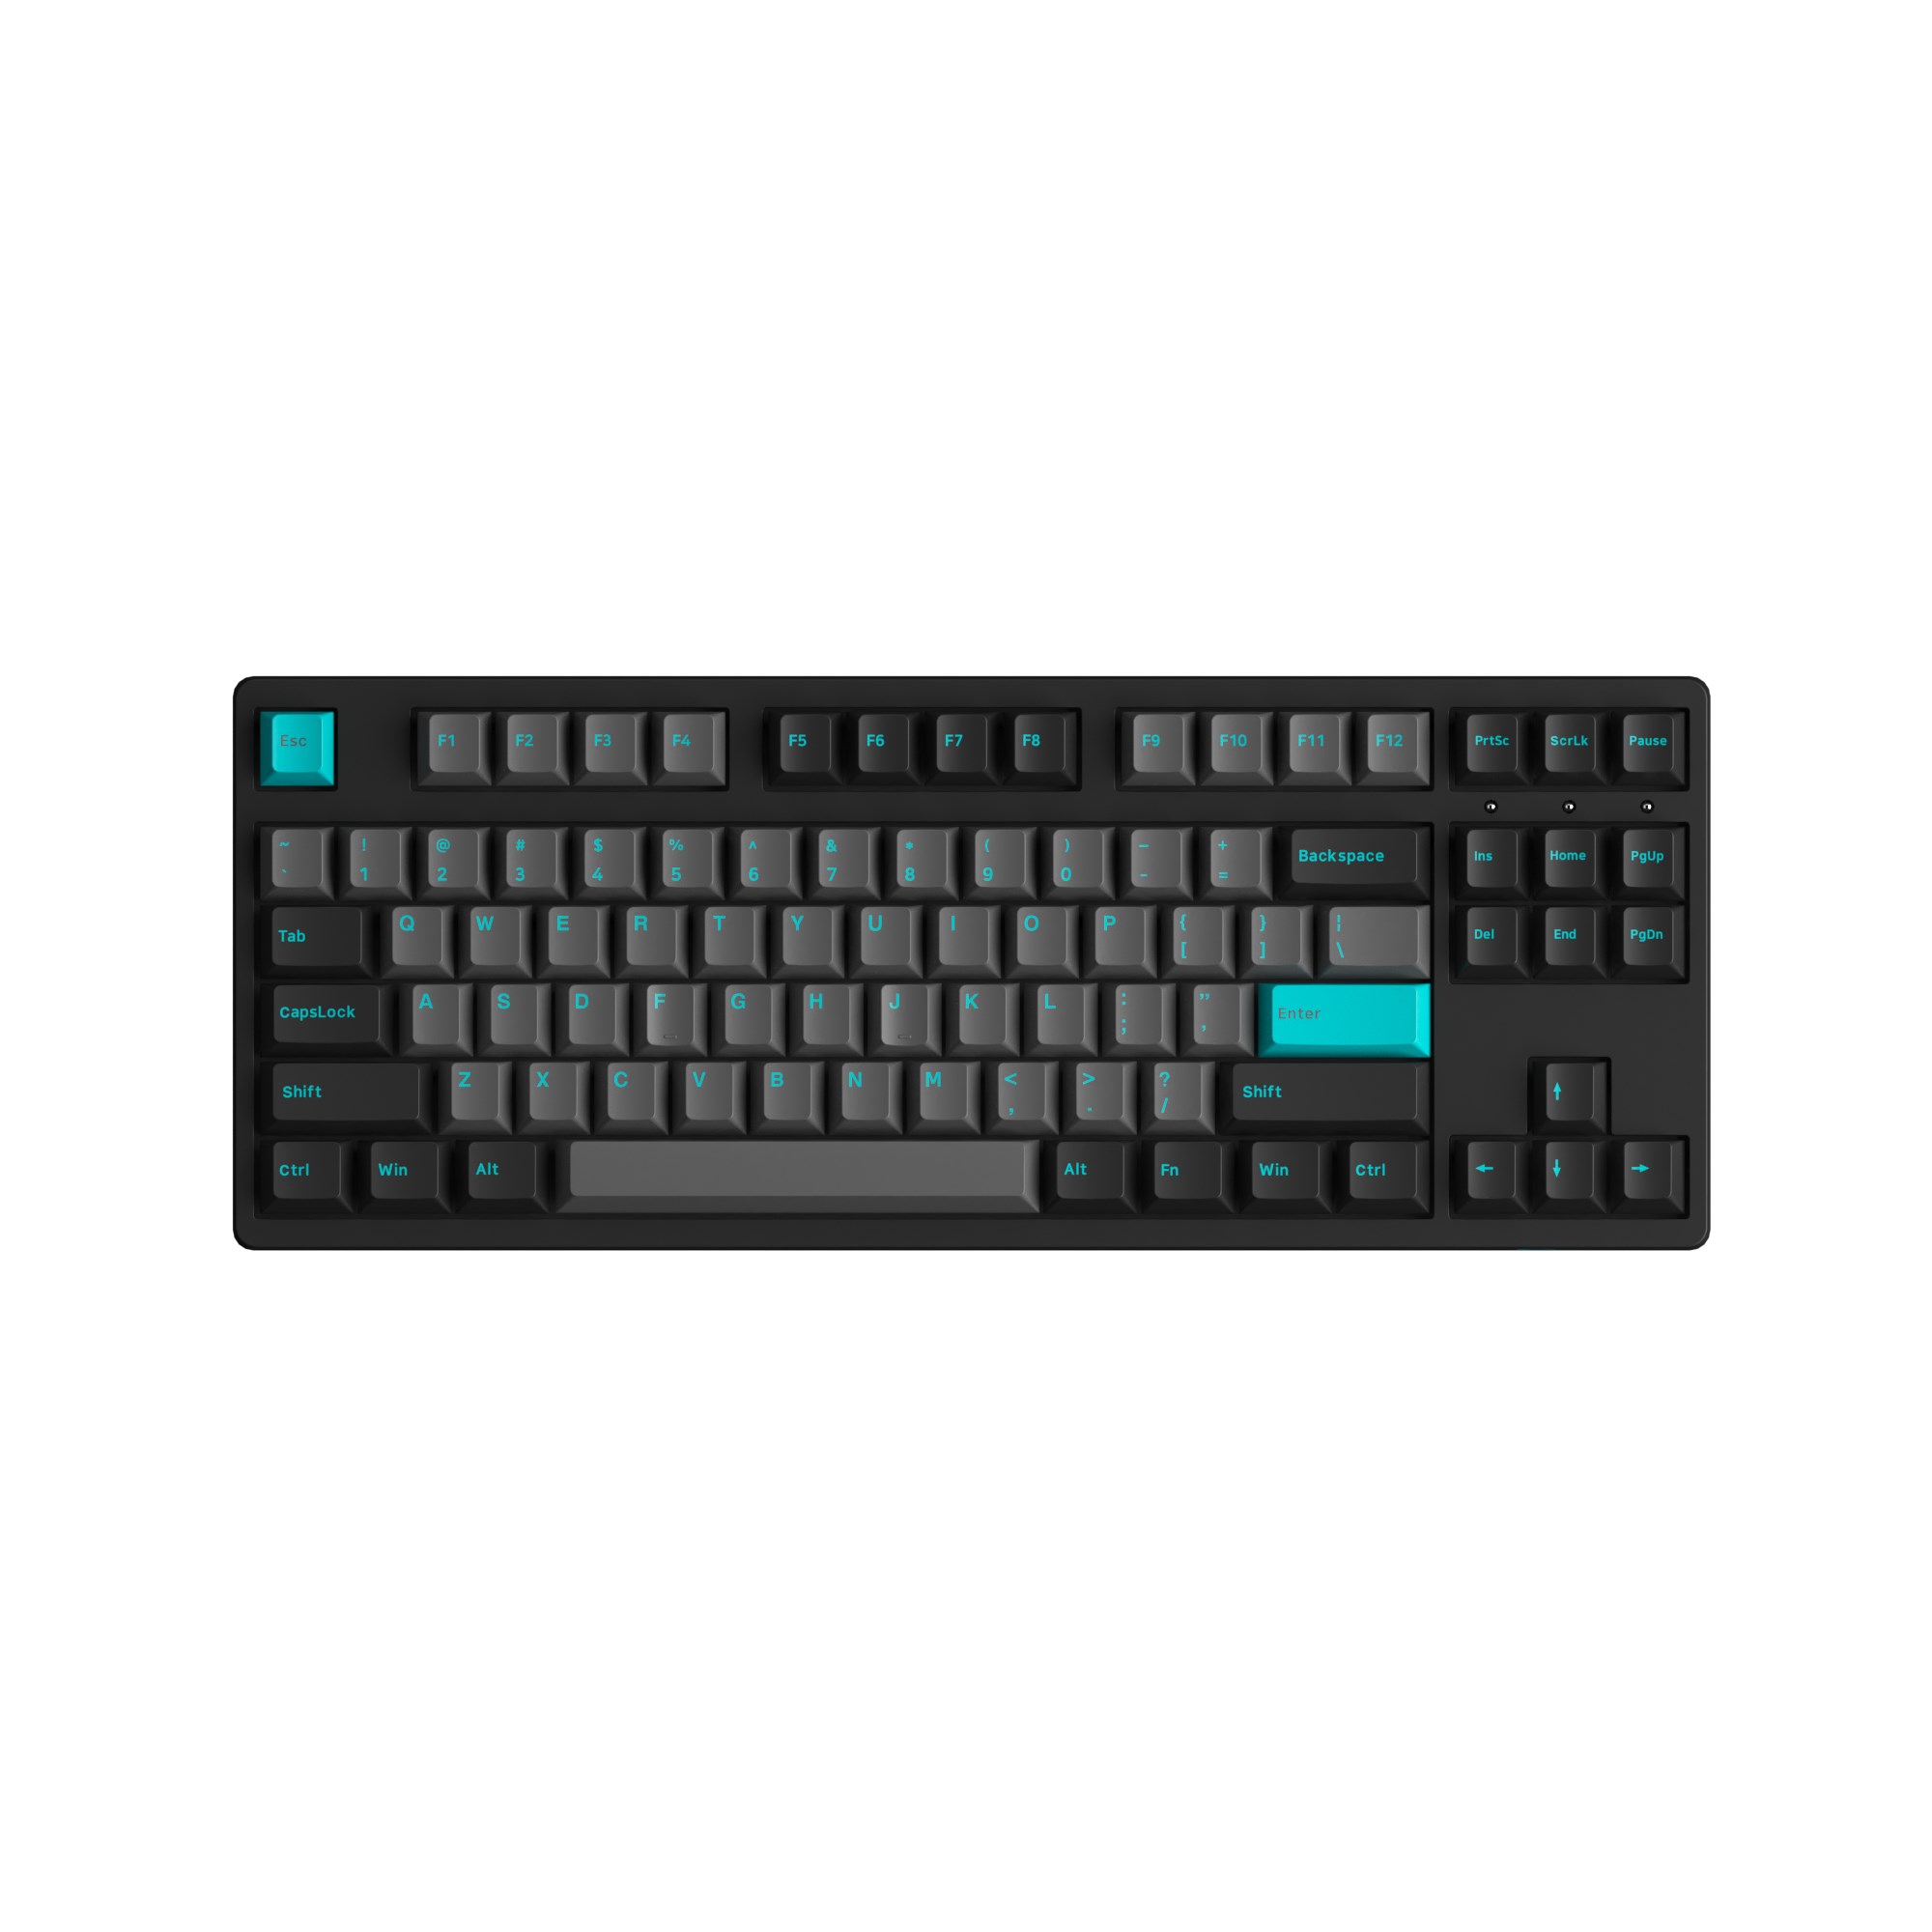 Official Akko 3087 Plus Black&Cyan Mechanical Gaming Keyboard 85% Layout TKL Wired USB-C with Cherry Profile PBT Double-Shot Keycaps